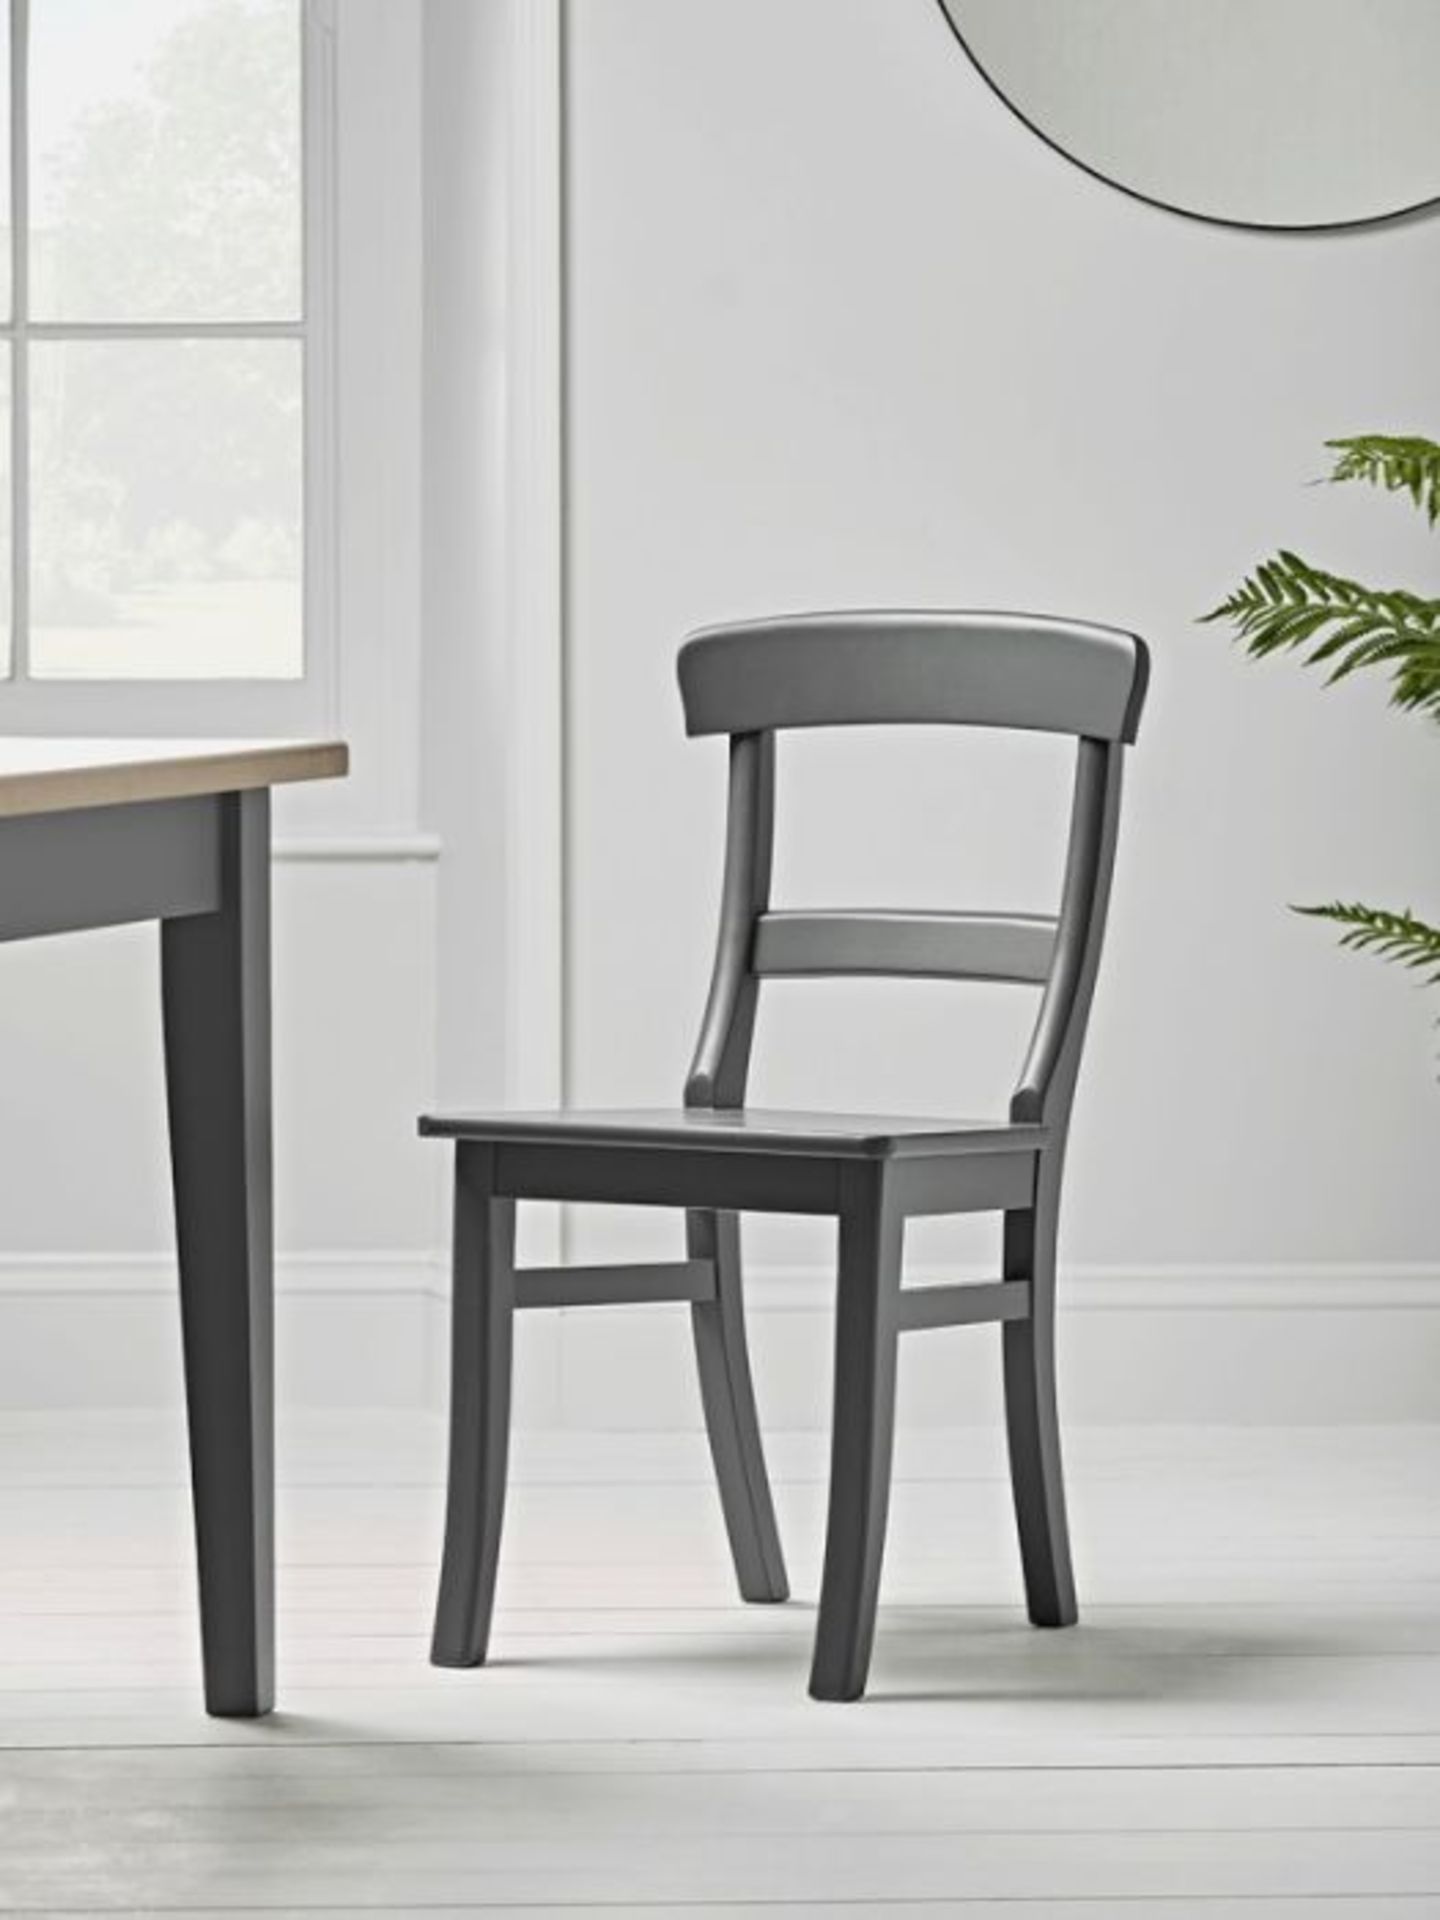 Cox & Cox Mette Wooden Dining Chair RRP £225.00 SKU COX-AP-1228370-B The clean, timeless form of our